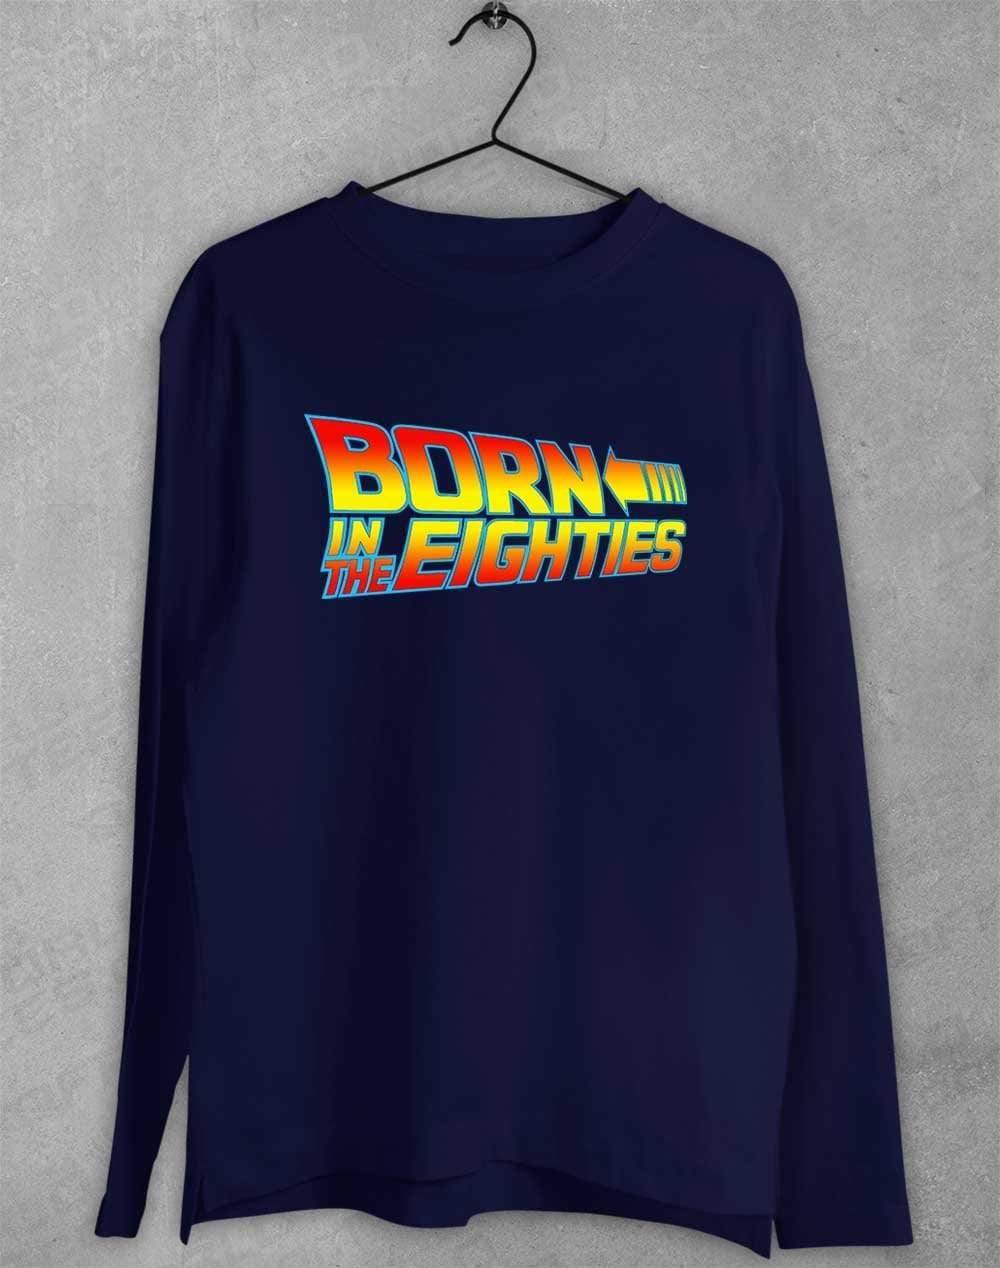 Born in the... (CHOOSE YOUR DECADE!) Long Sleeve T-Shirt 1980s - Navy / S  - Off World Tees